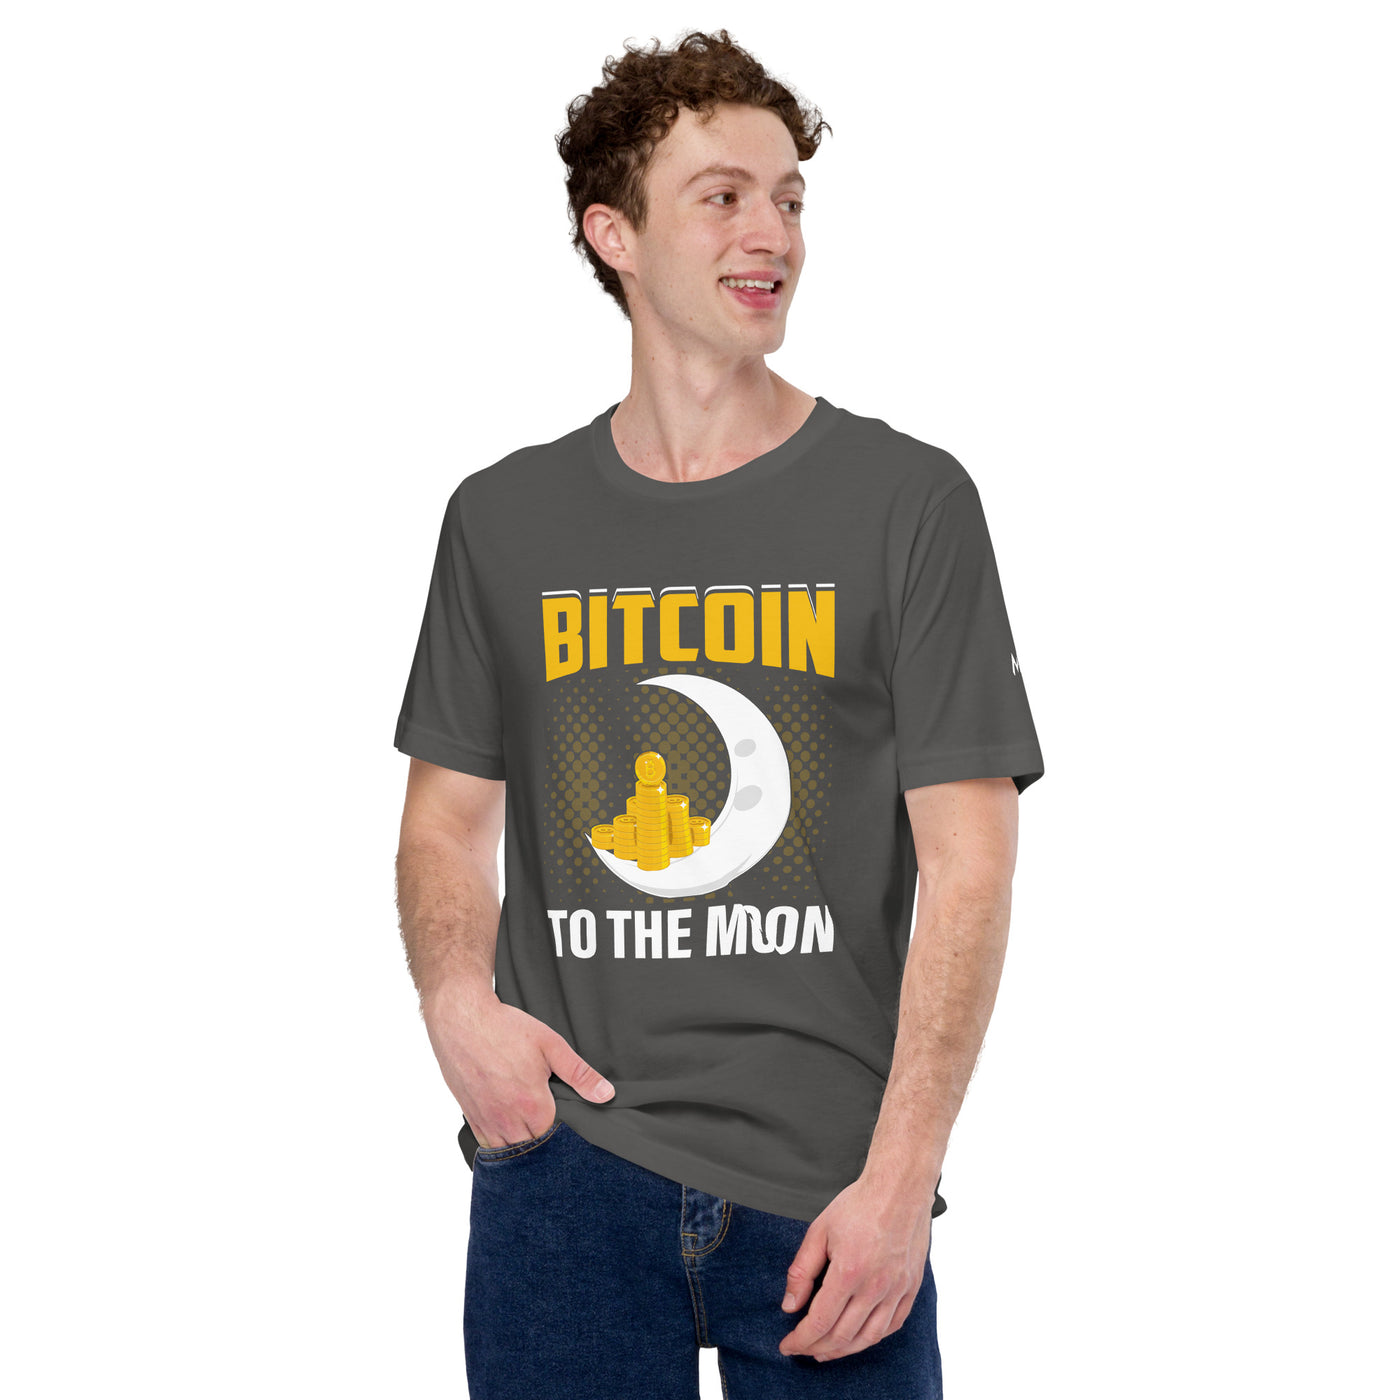 Bitcoin to the moon - Unisex t-shirt